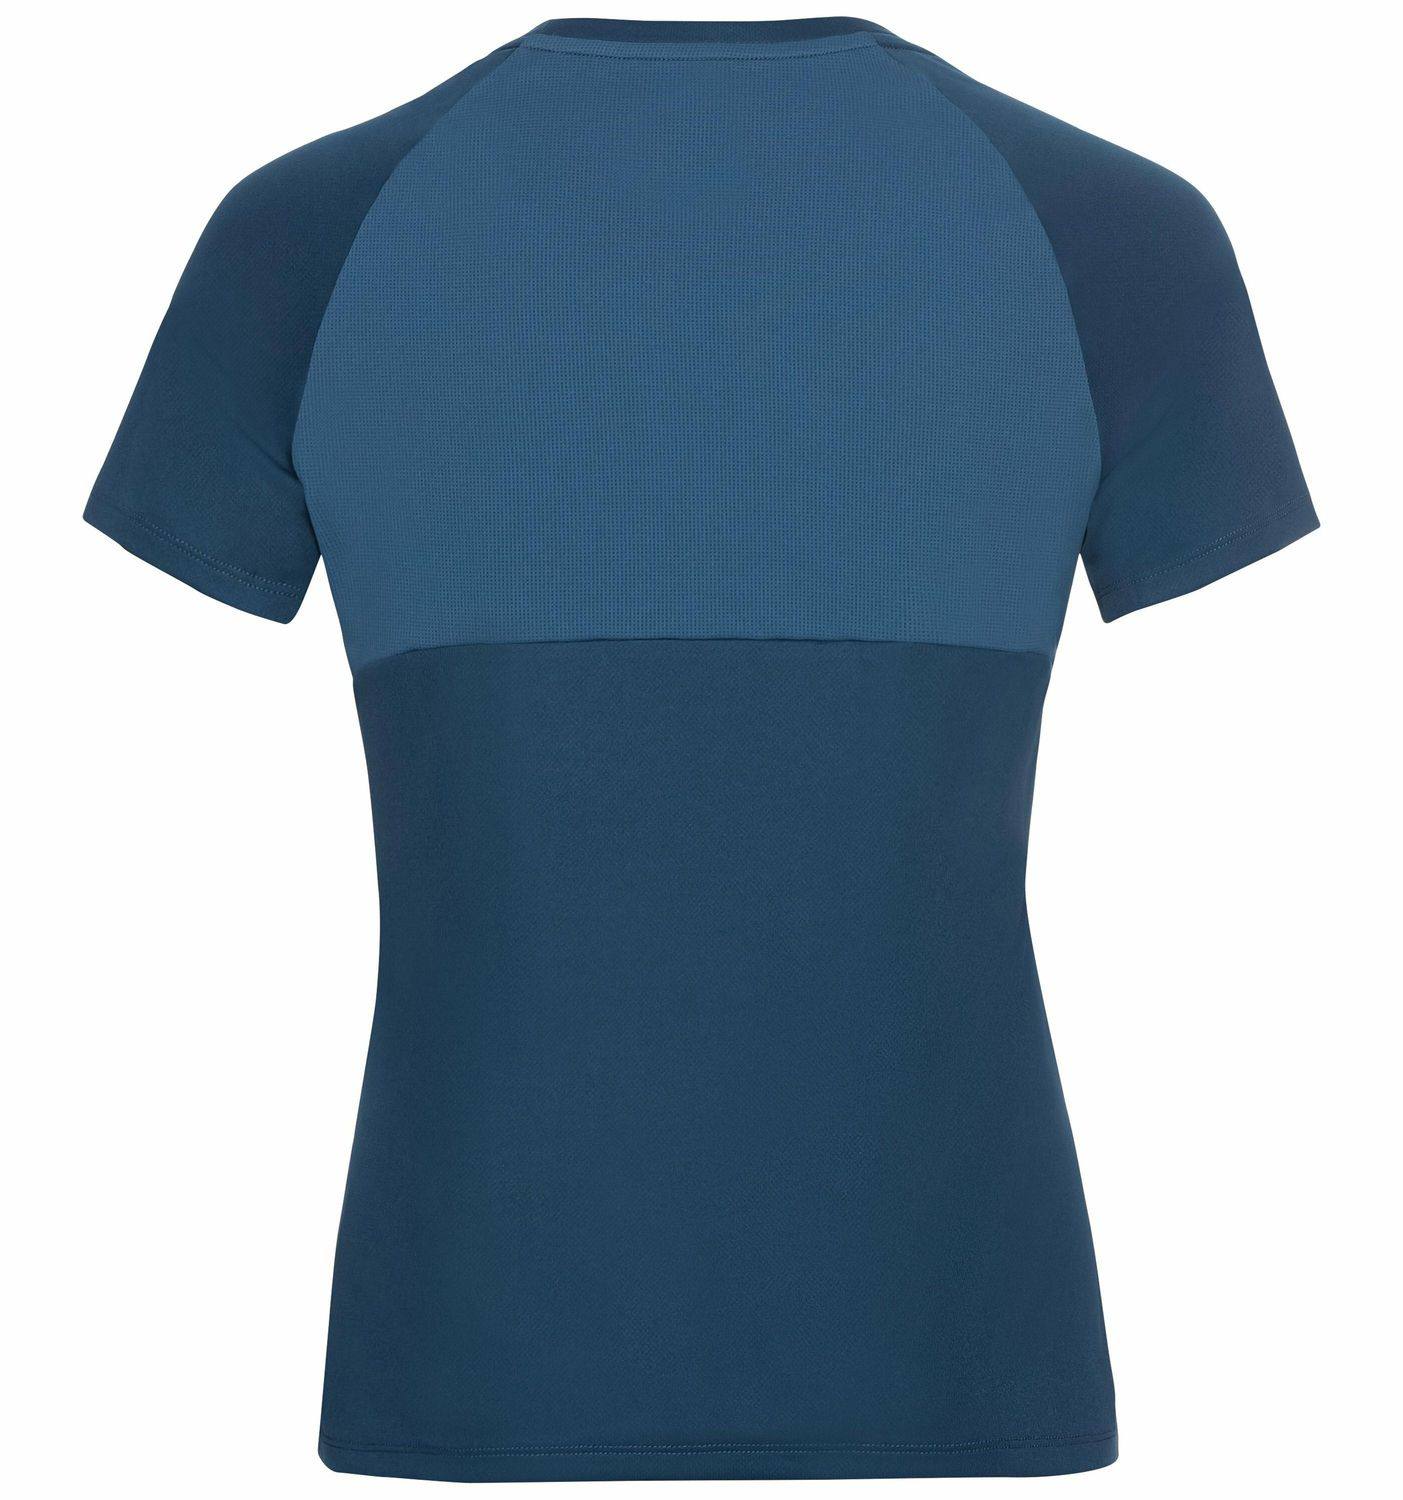 Women’s Essential Chill Tech Tee Teal M